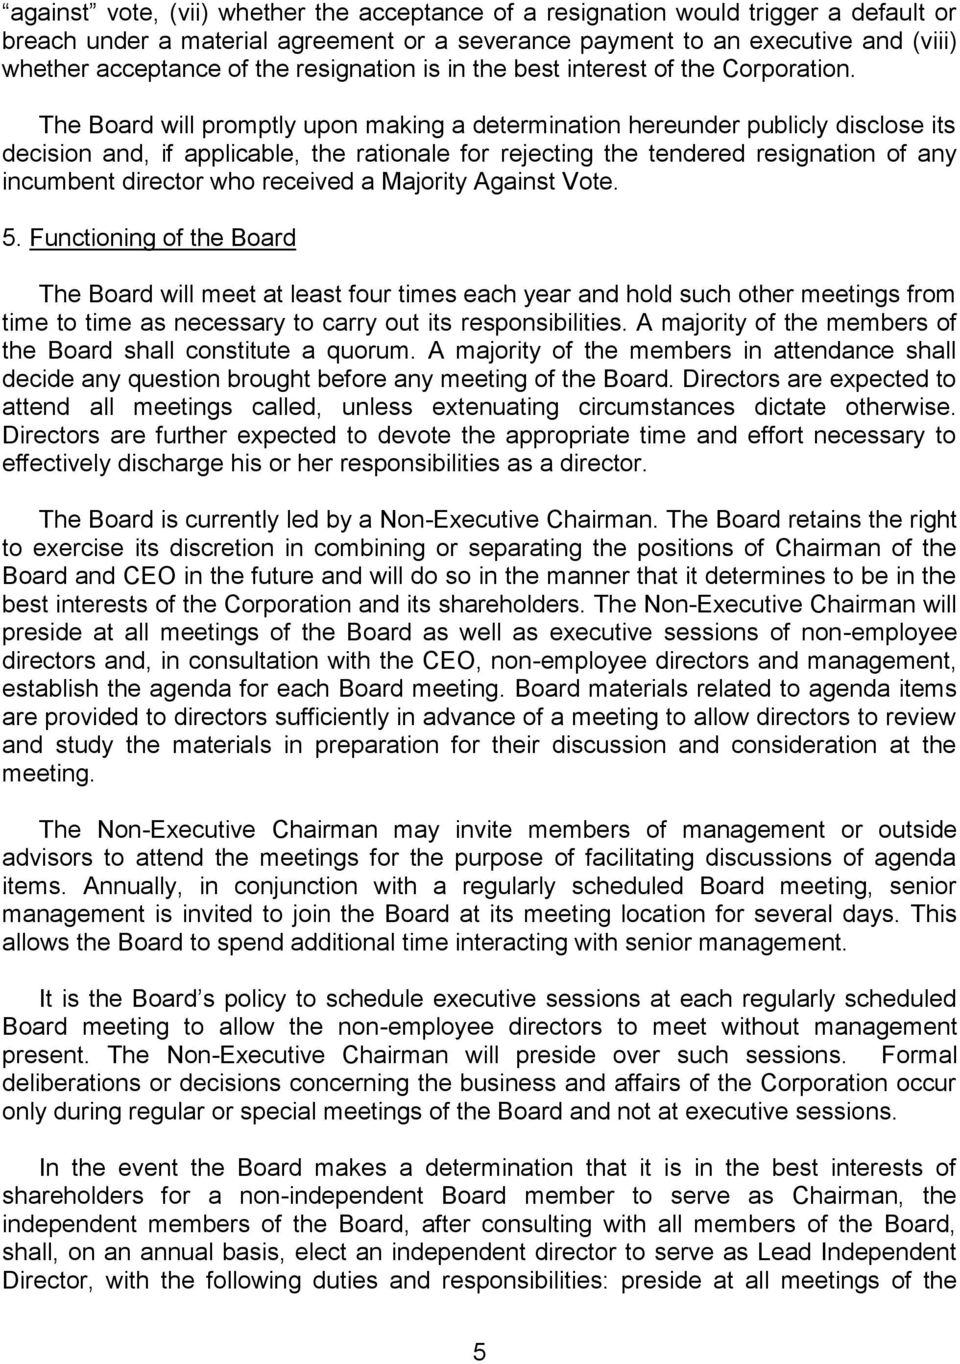 The Board will promptly upon making a determination hereunder publicly disclose its decision and, if applicable, the rationale for rejecting the tendered resignation of any incumbent director who